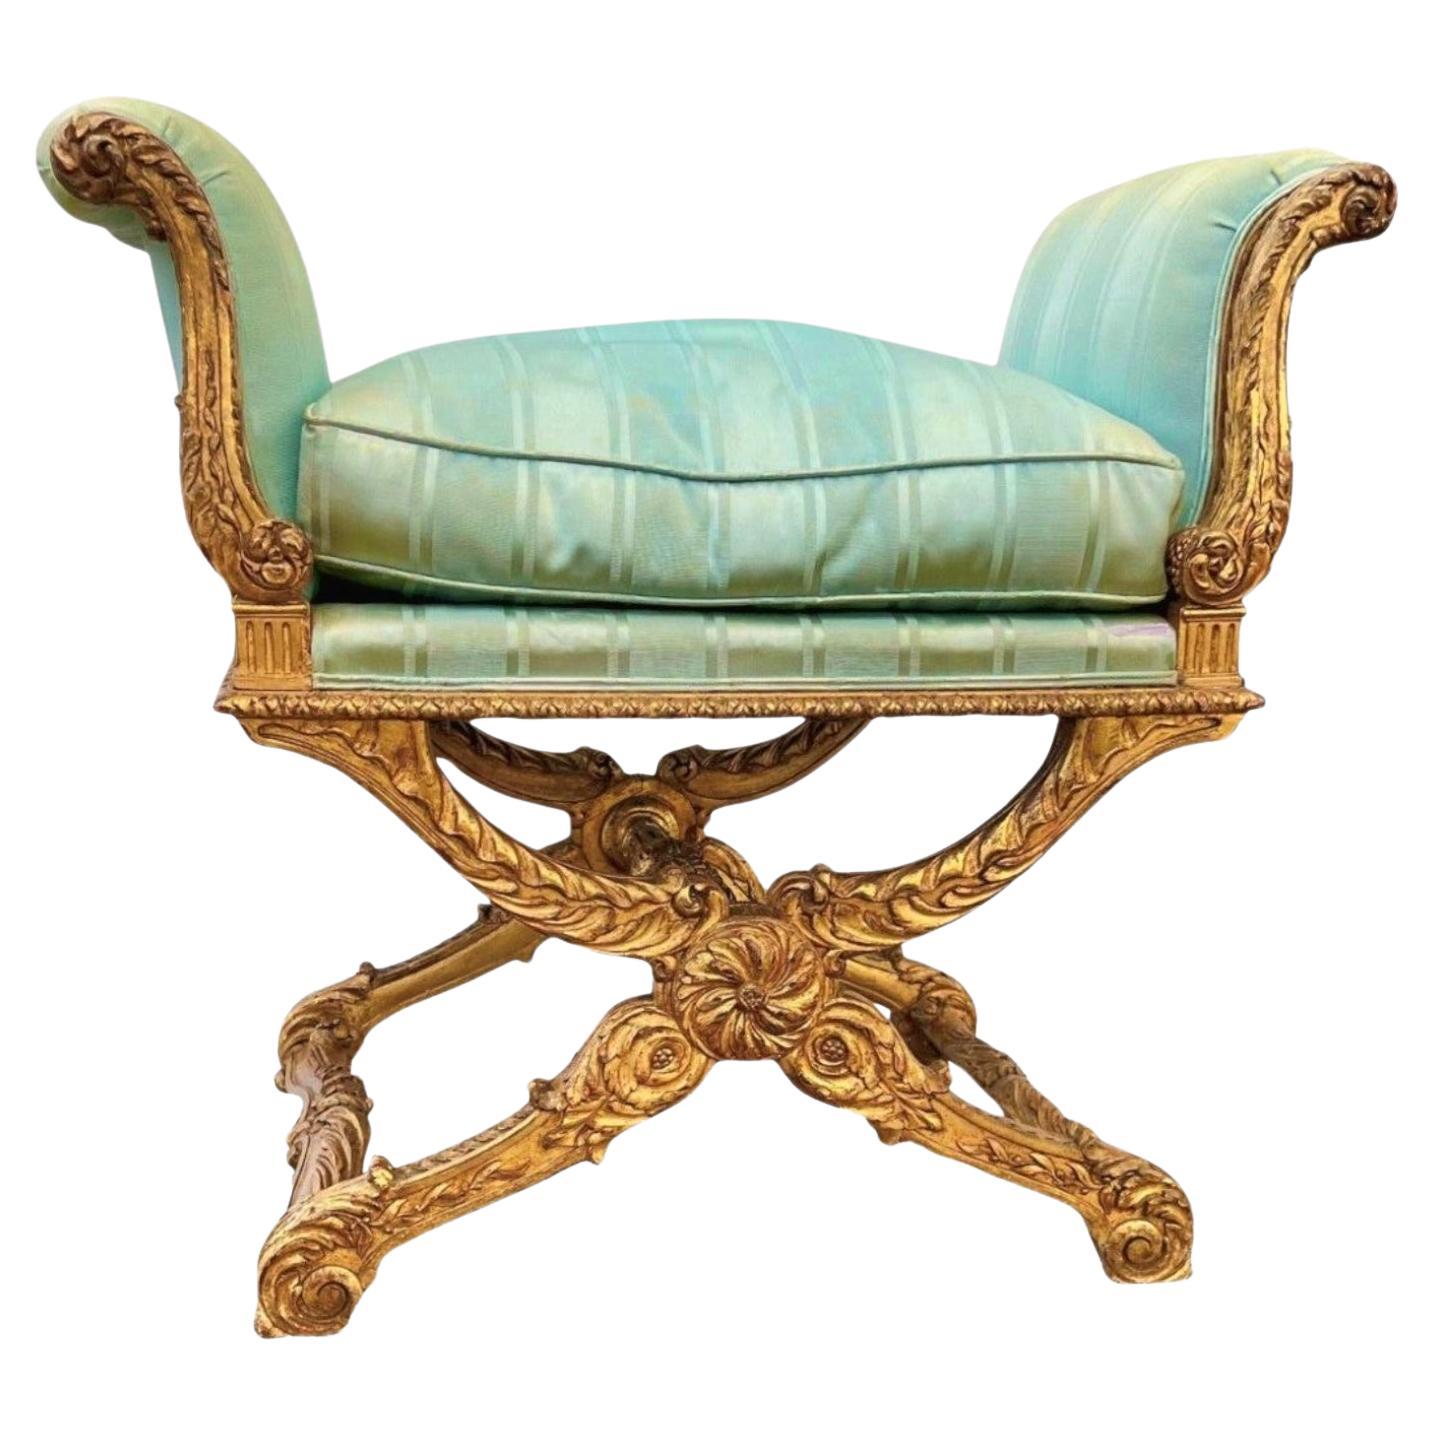 Giltwood Bench or Window Seat in Louis XV Style